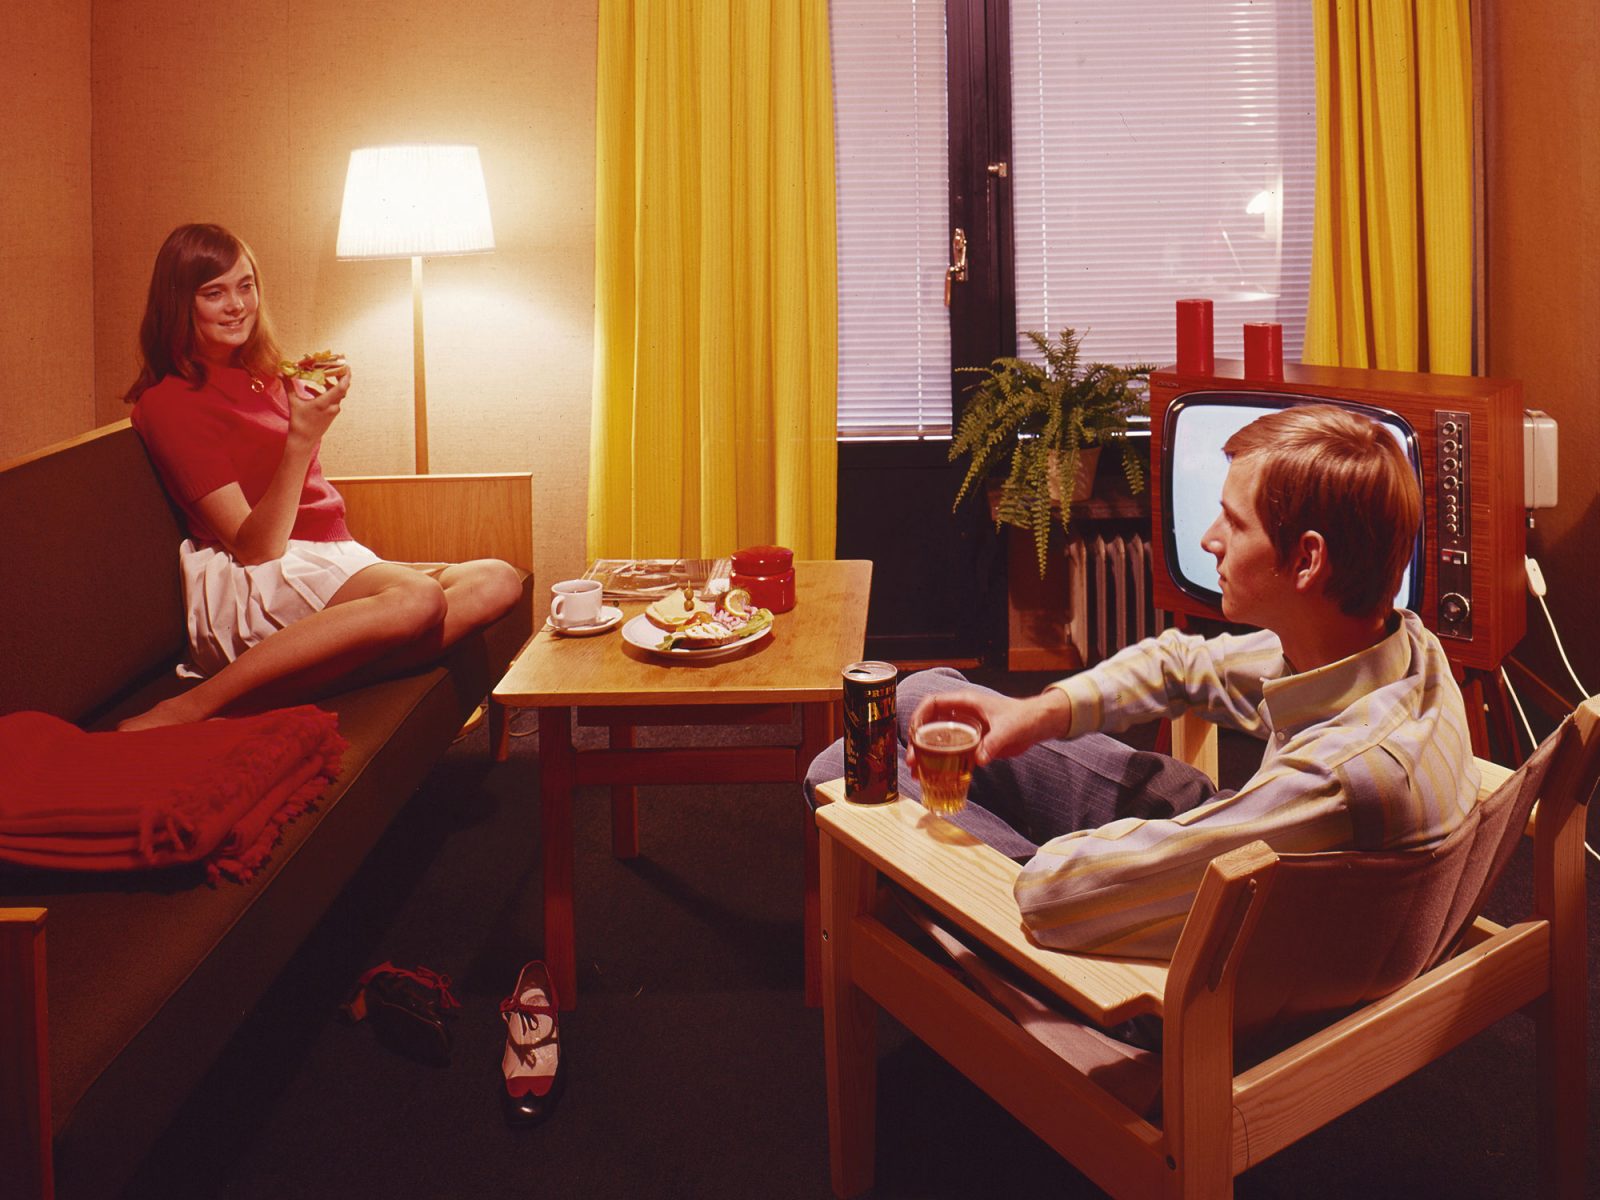 1960s style motel room interior, low oak sofa and yellow curtains, a couple drinking beer, coffee and eating snacks.